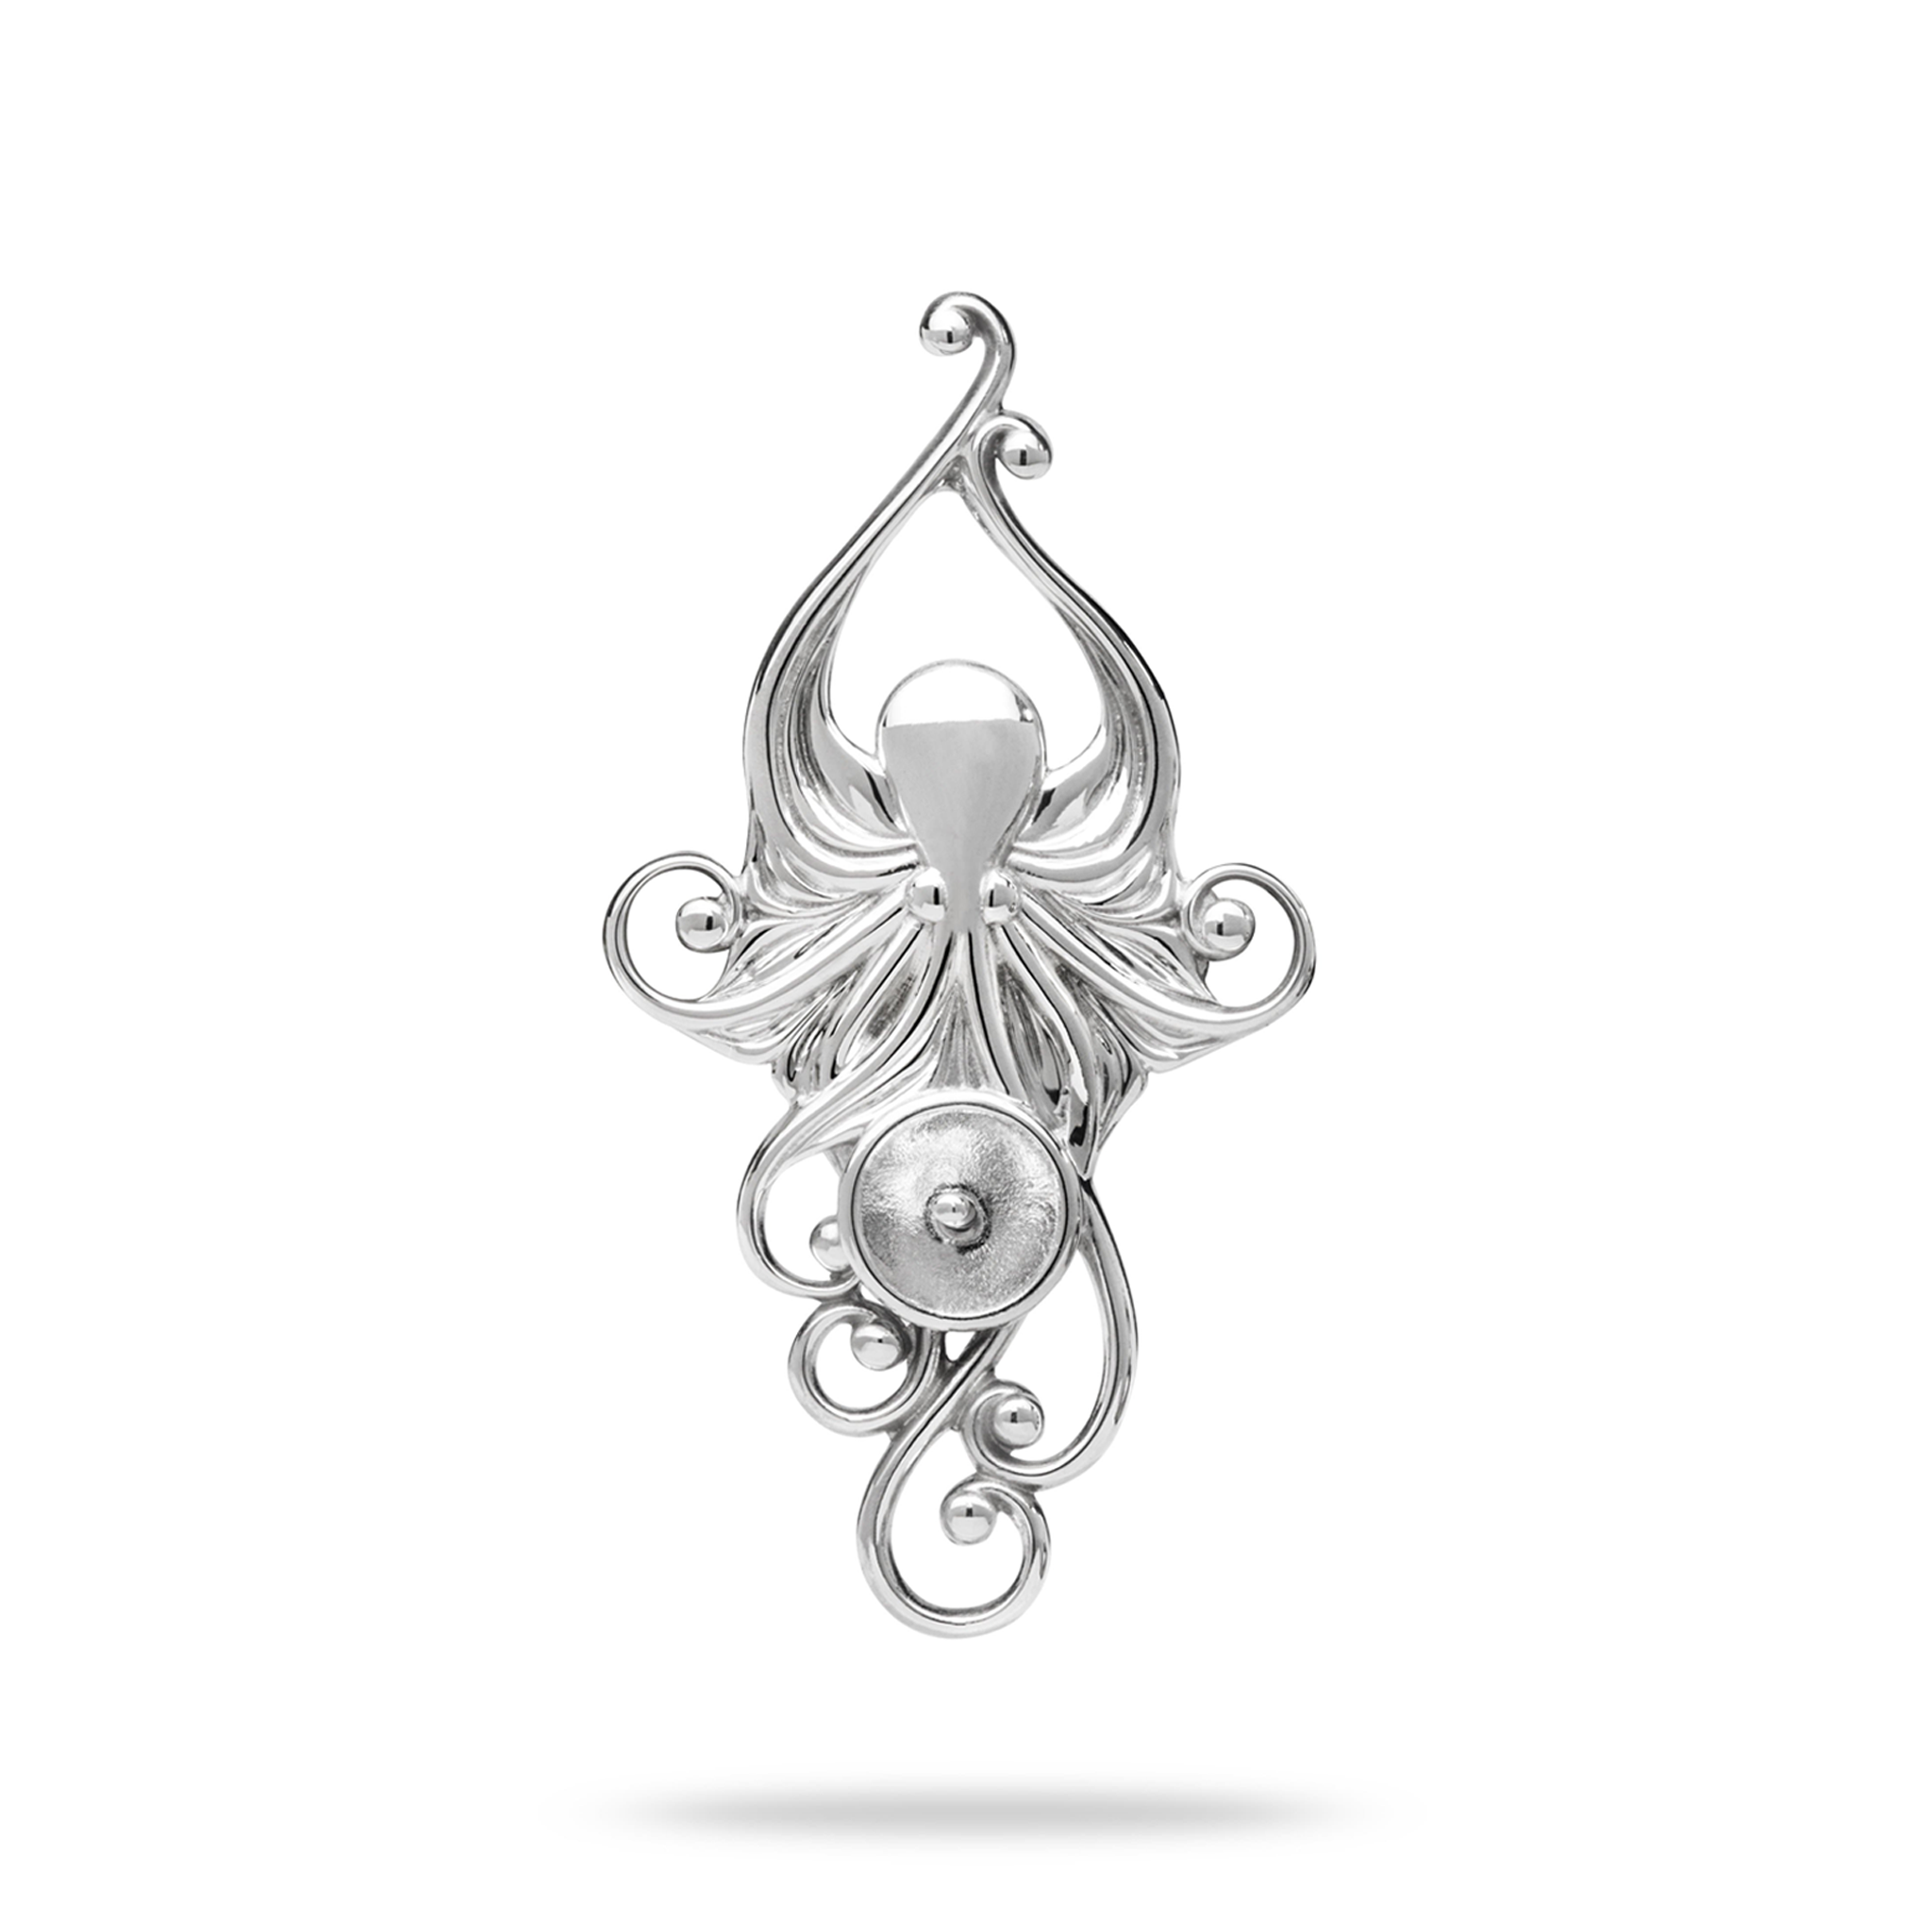 Pick A Pearl Living Heirloom Octopus Pendant in Sterling Silver - 36mm